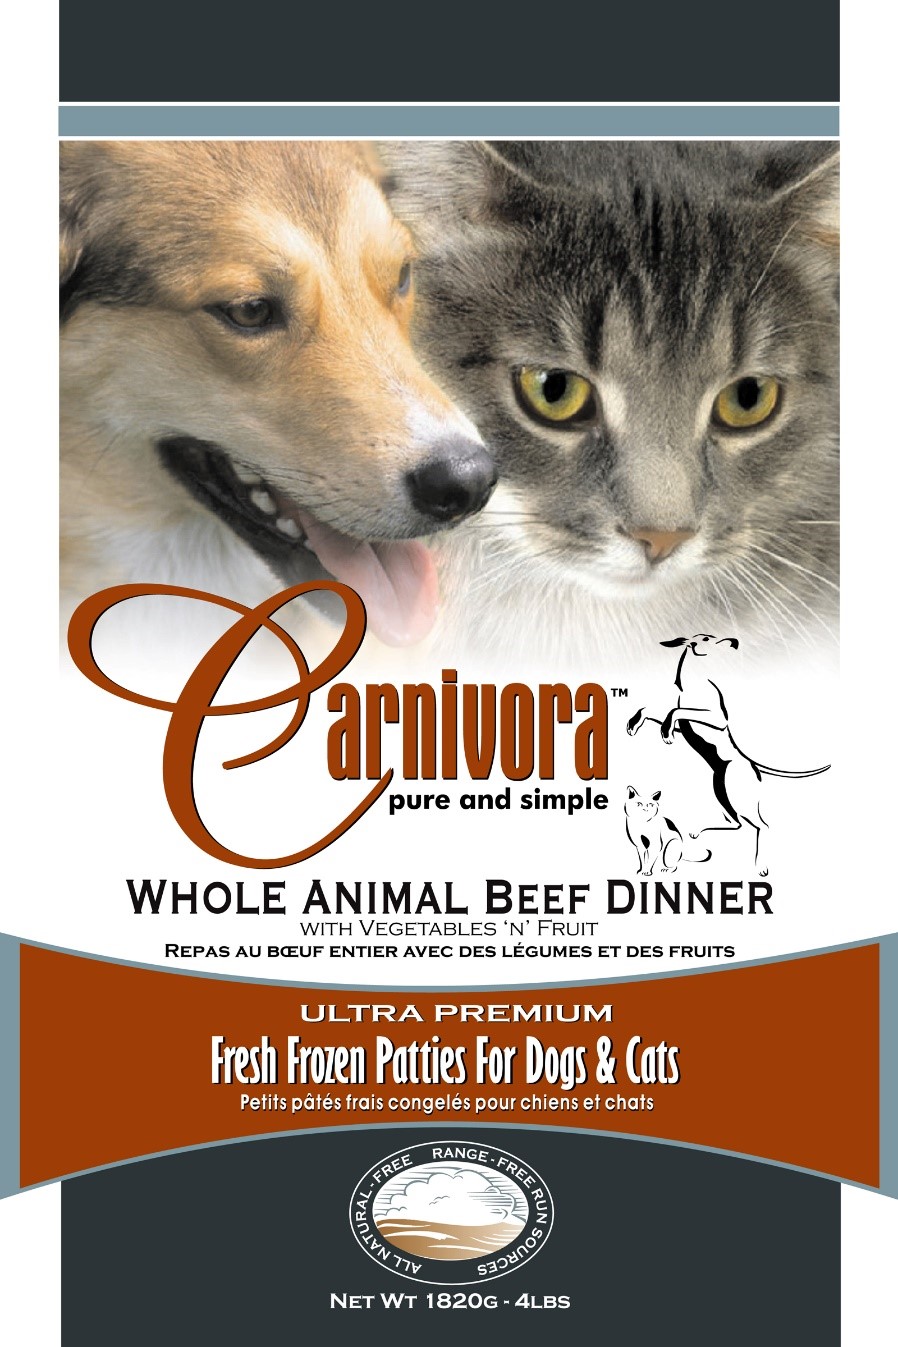 Carnivora Fresh Frozen Patties for Dogs and Cats recalled due to E.coli contamination